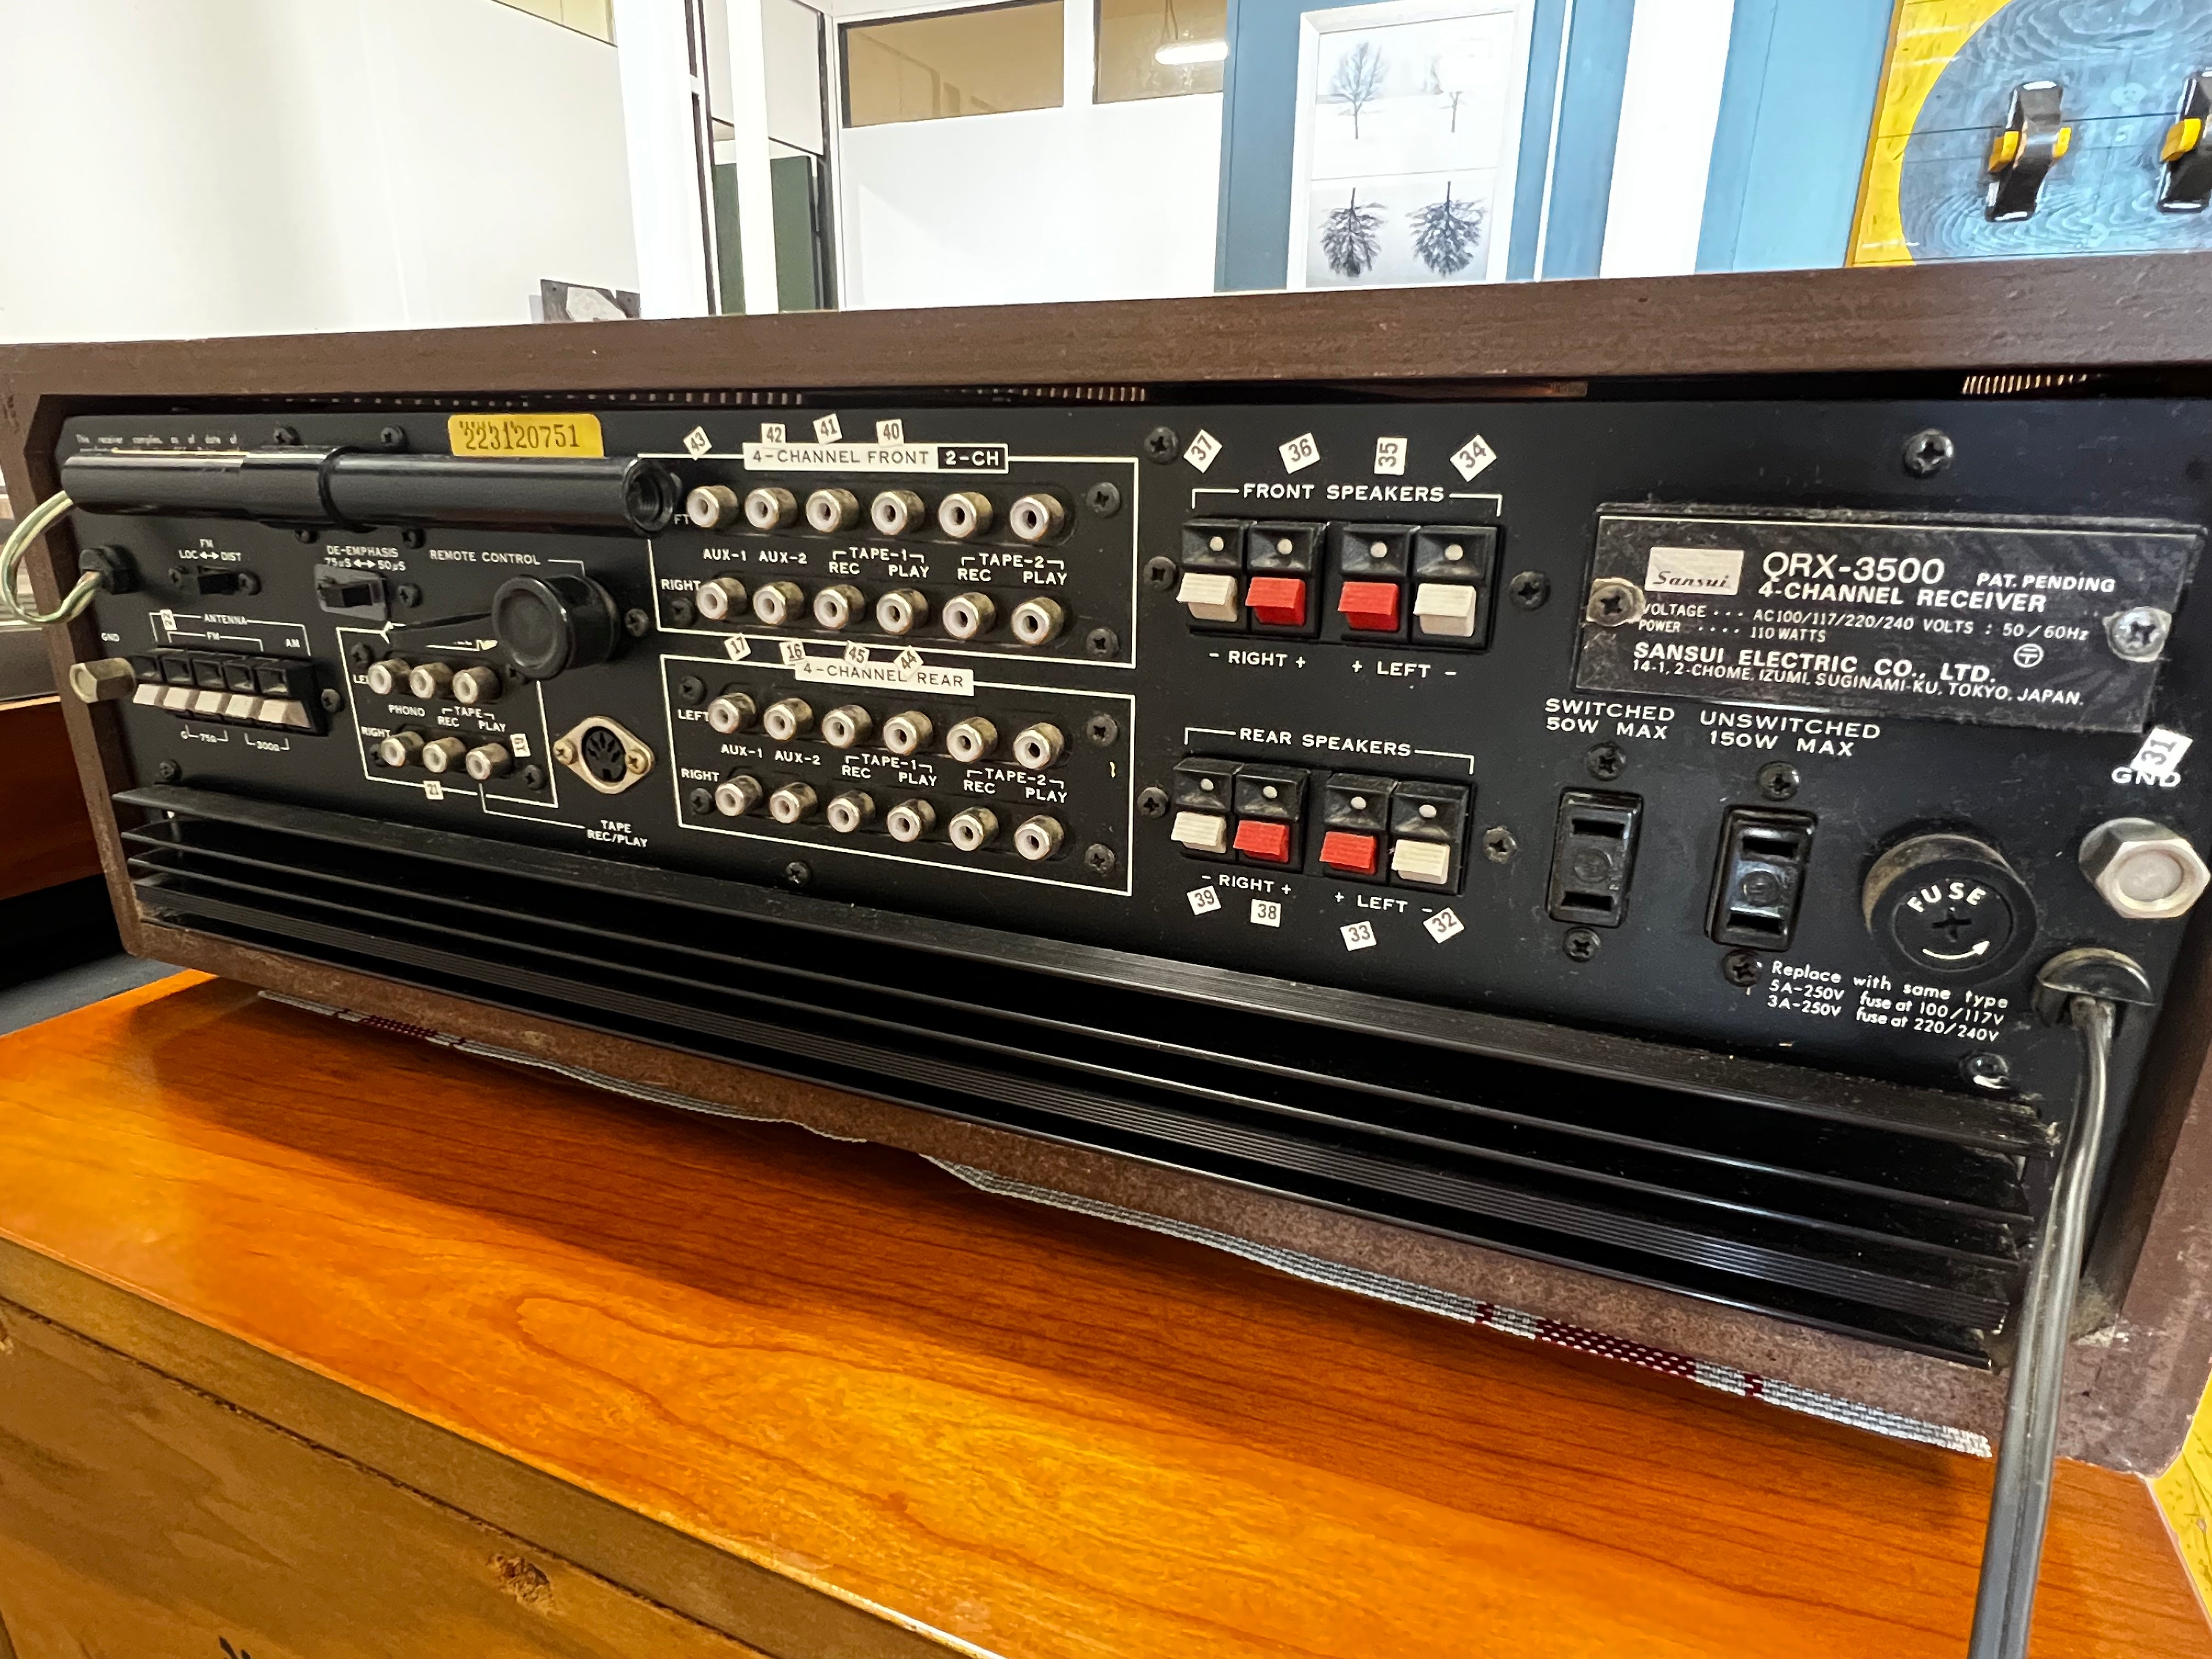 Sansui QRX-3500, Stereo or Quad, Awesome Receiver